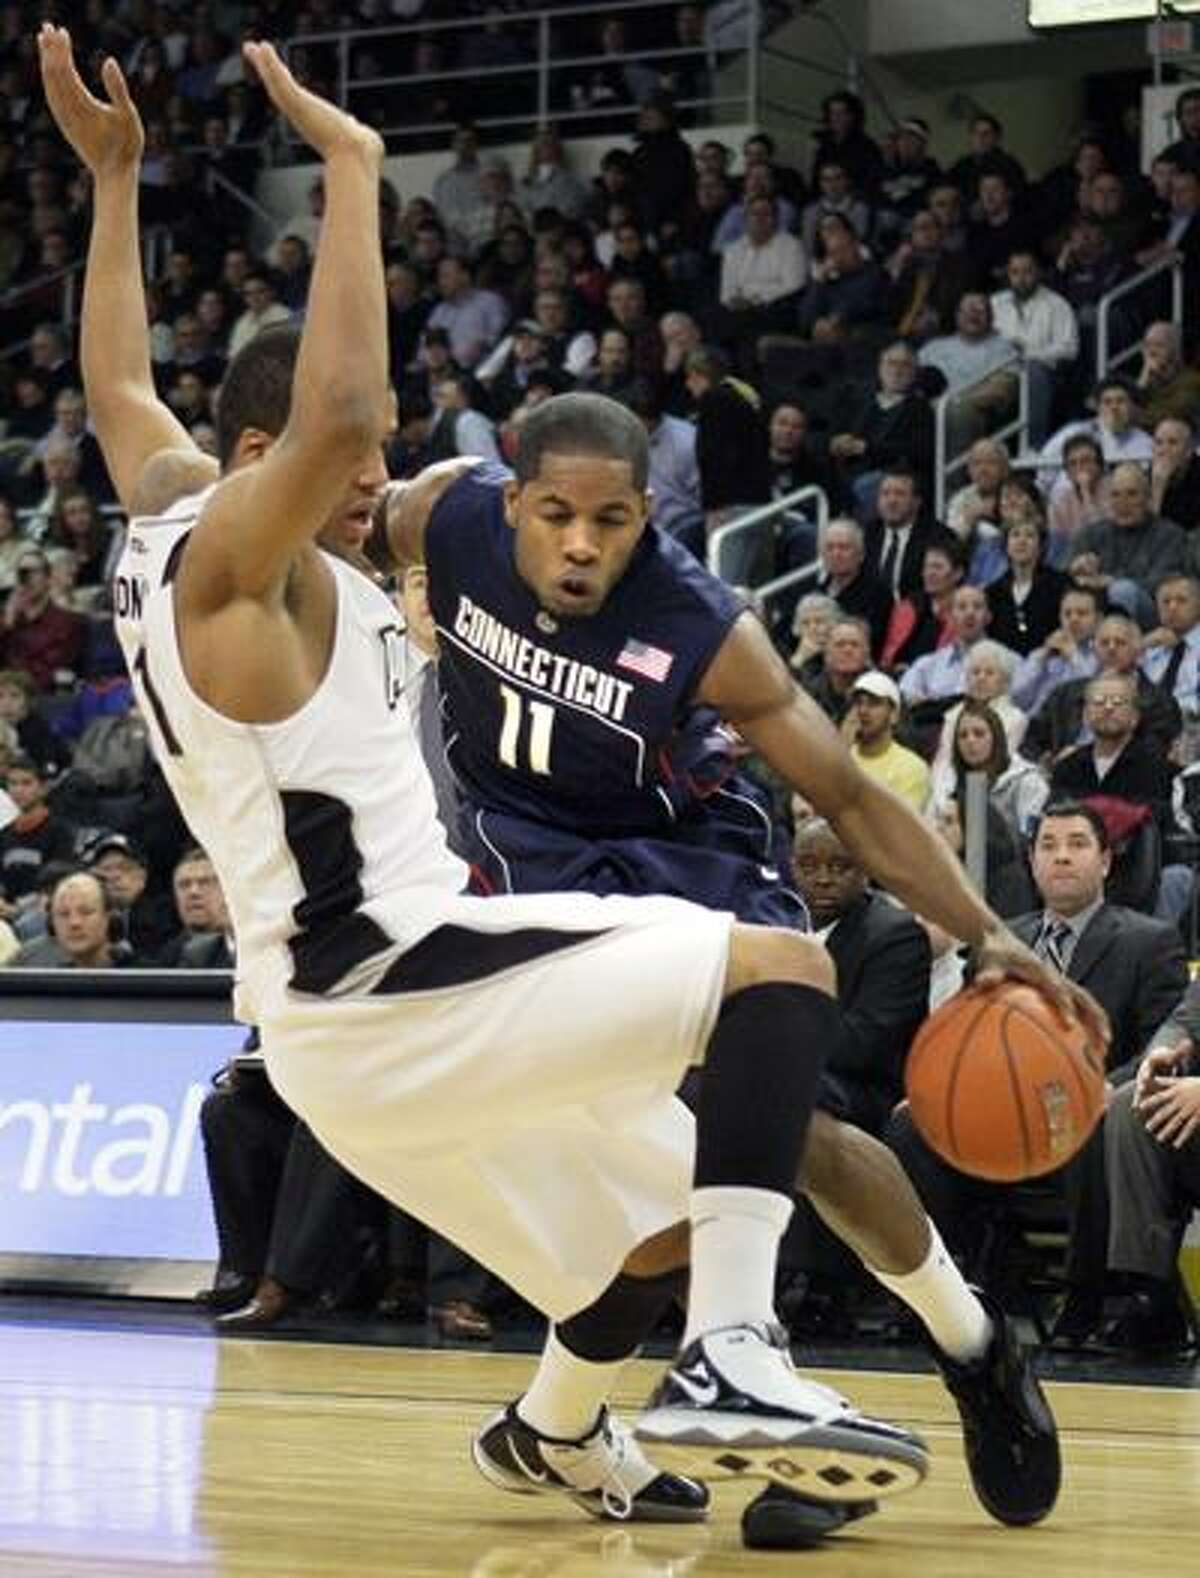 Connecticut's Jerome Dyson (11) drives against Providence's Duke Monday (1) during the first half Wednesday. (Associated Press)